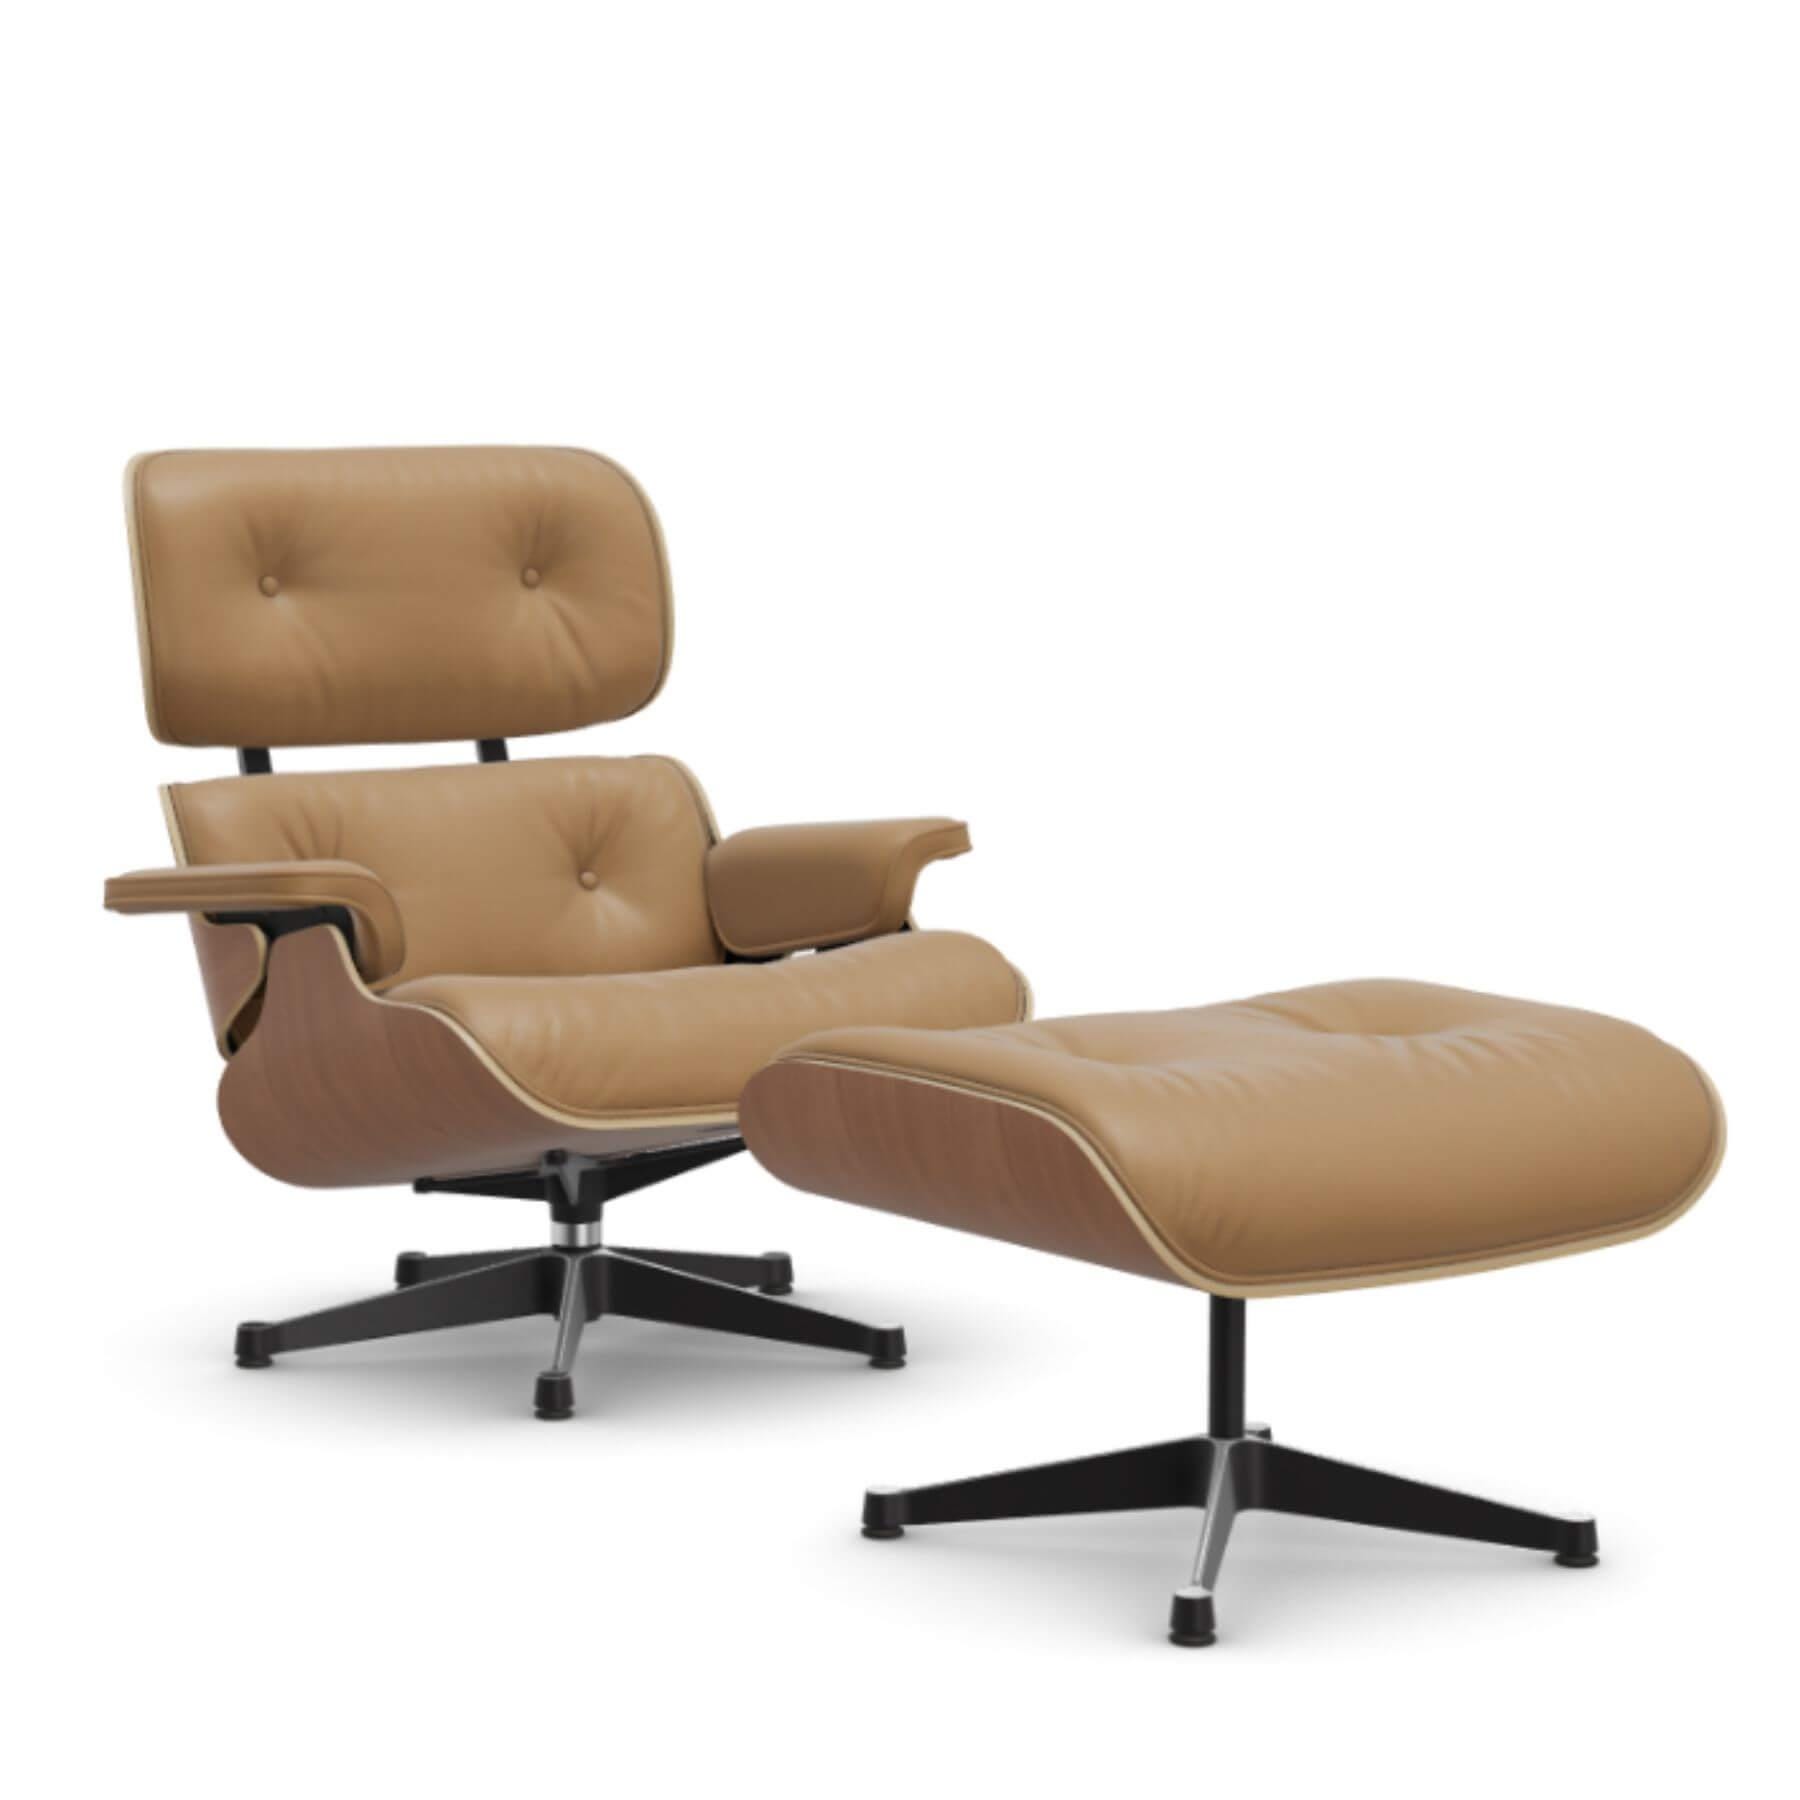 Vitra Eames Classic Lounge Chair American Cherry Leather Natural F Caramel Polished Black With Ottoman Light Wood Designer Furniture From Holloway